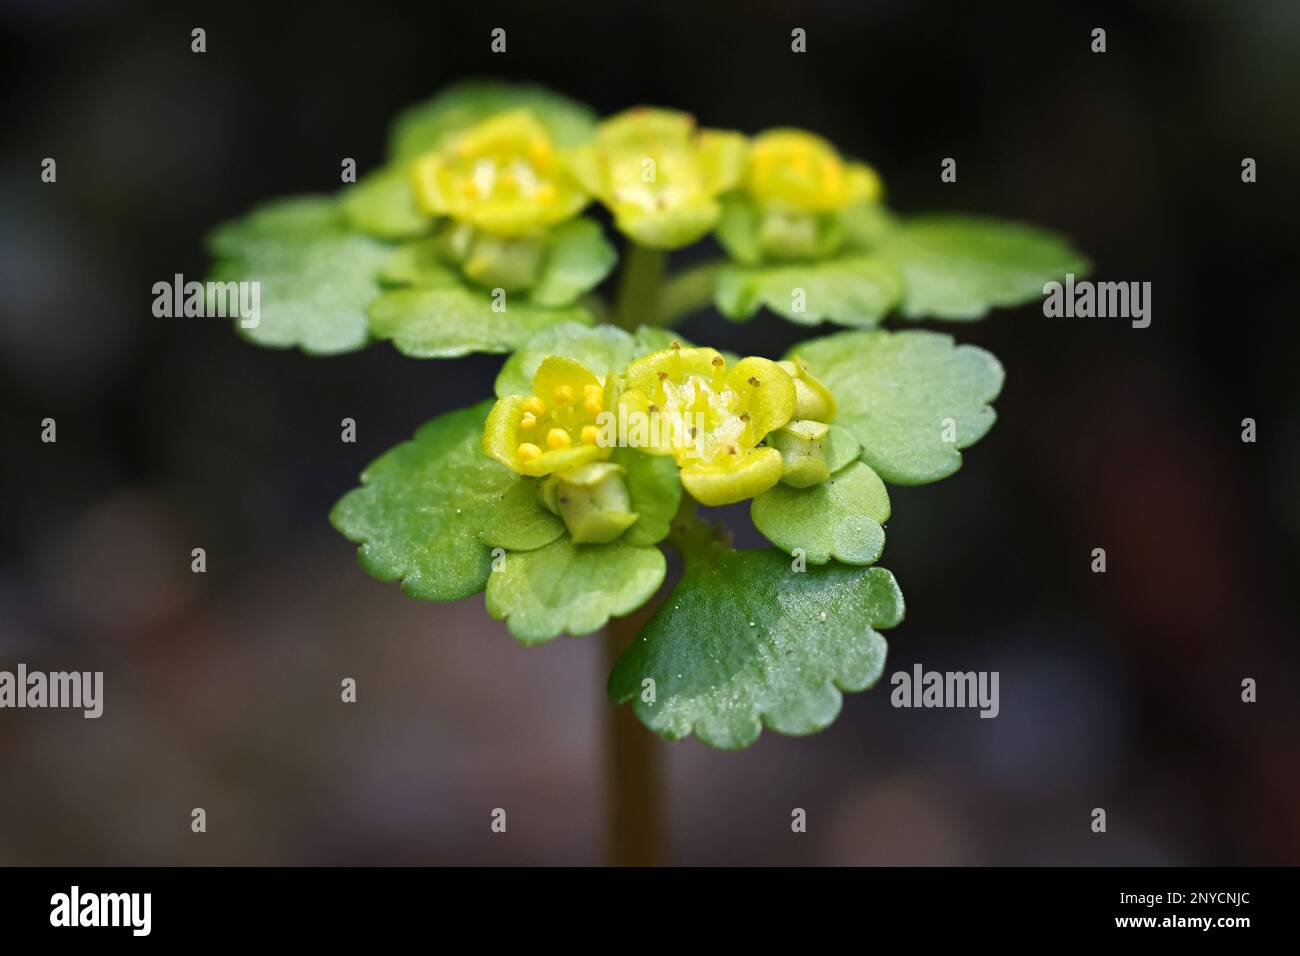 Chrysosplenium alternifolium, known as the alternate-leaved golden-saxifrage, an early spring flower from Finland Stock Photo